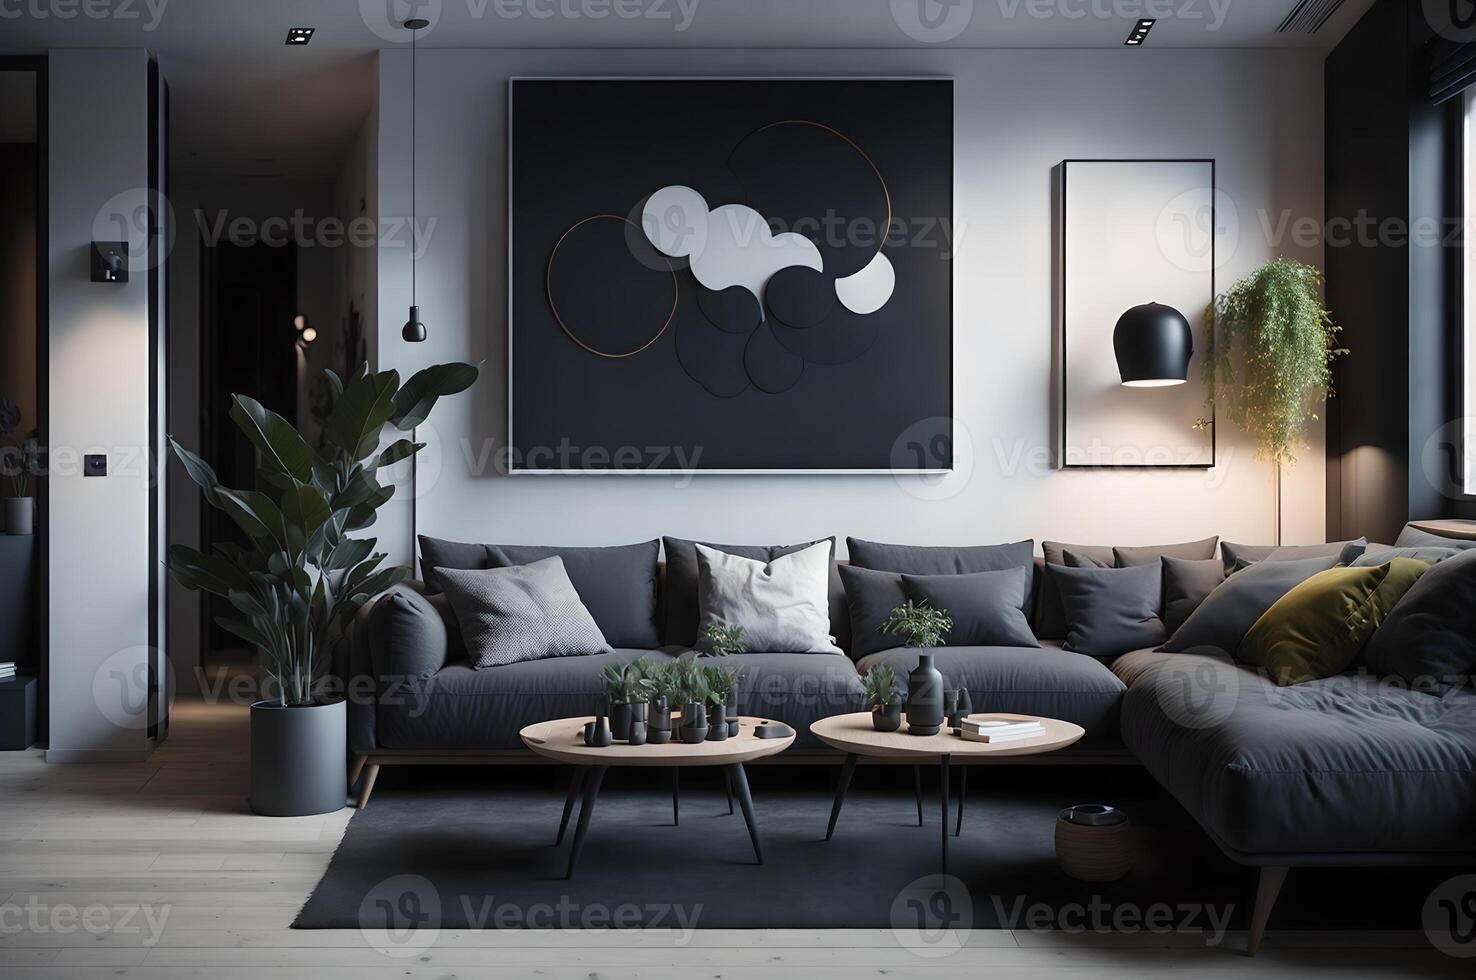 modern living room interior design with elegant gray sofa, pillows, floor, plants, wooden table, lamp, and great design tableau, photo